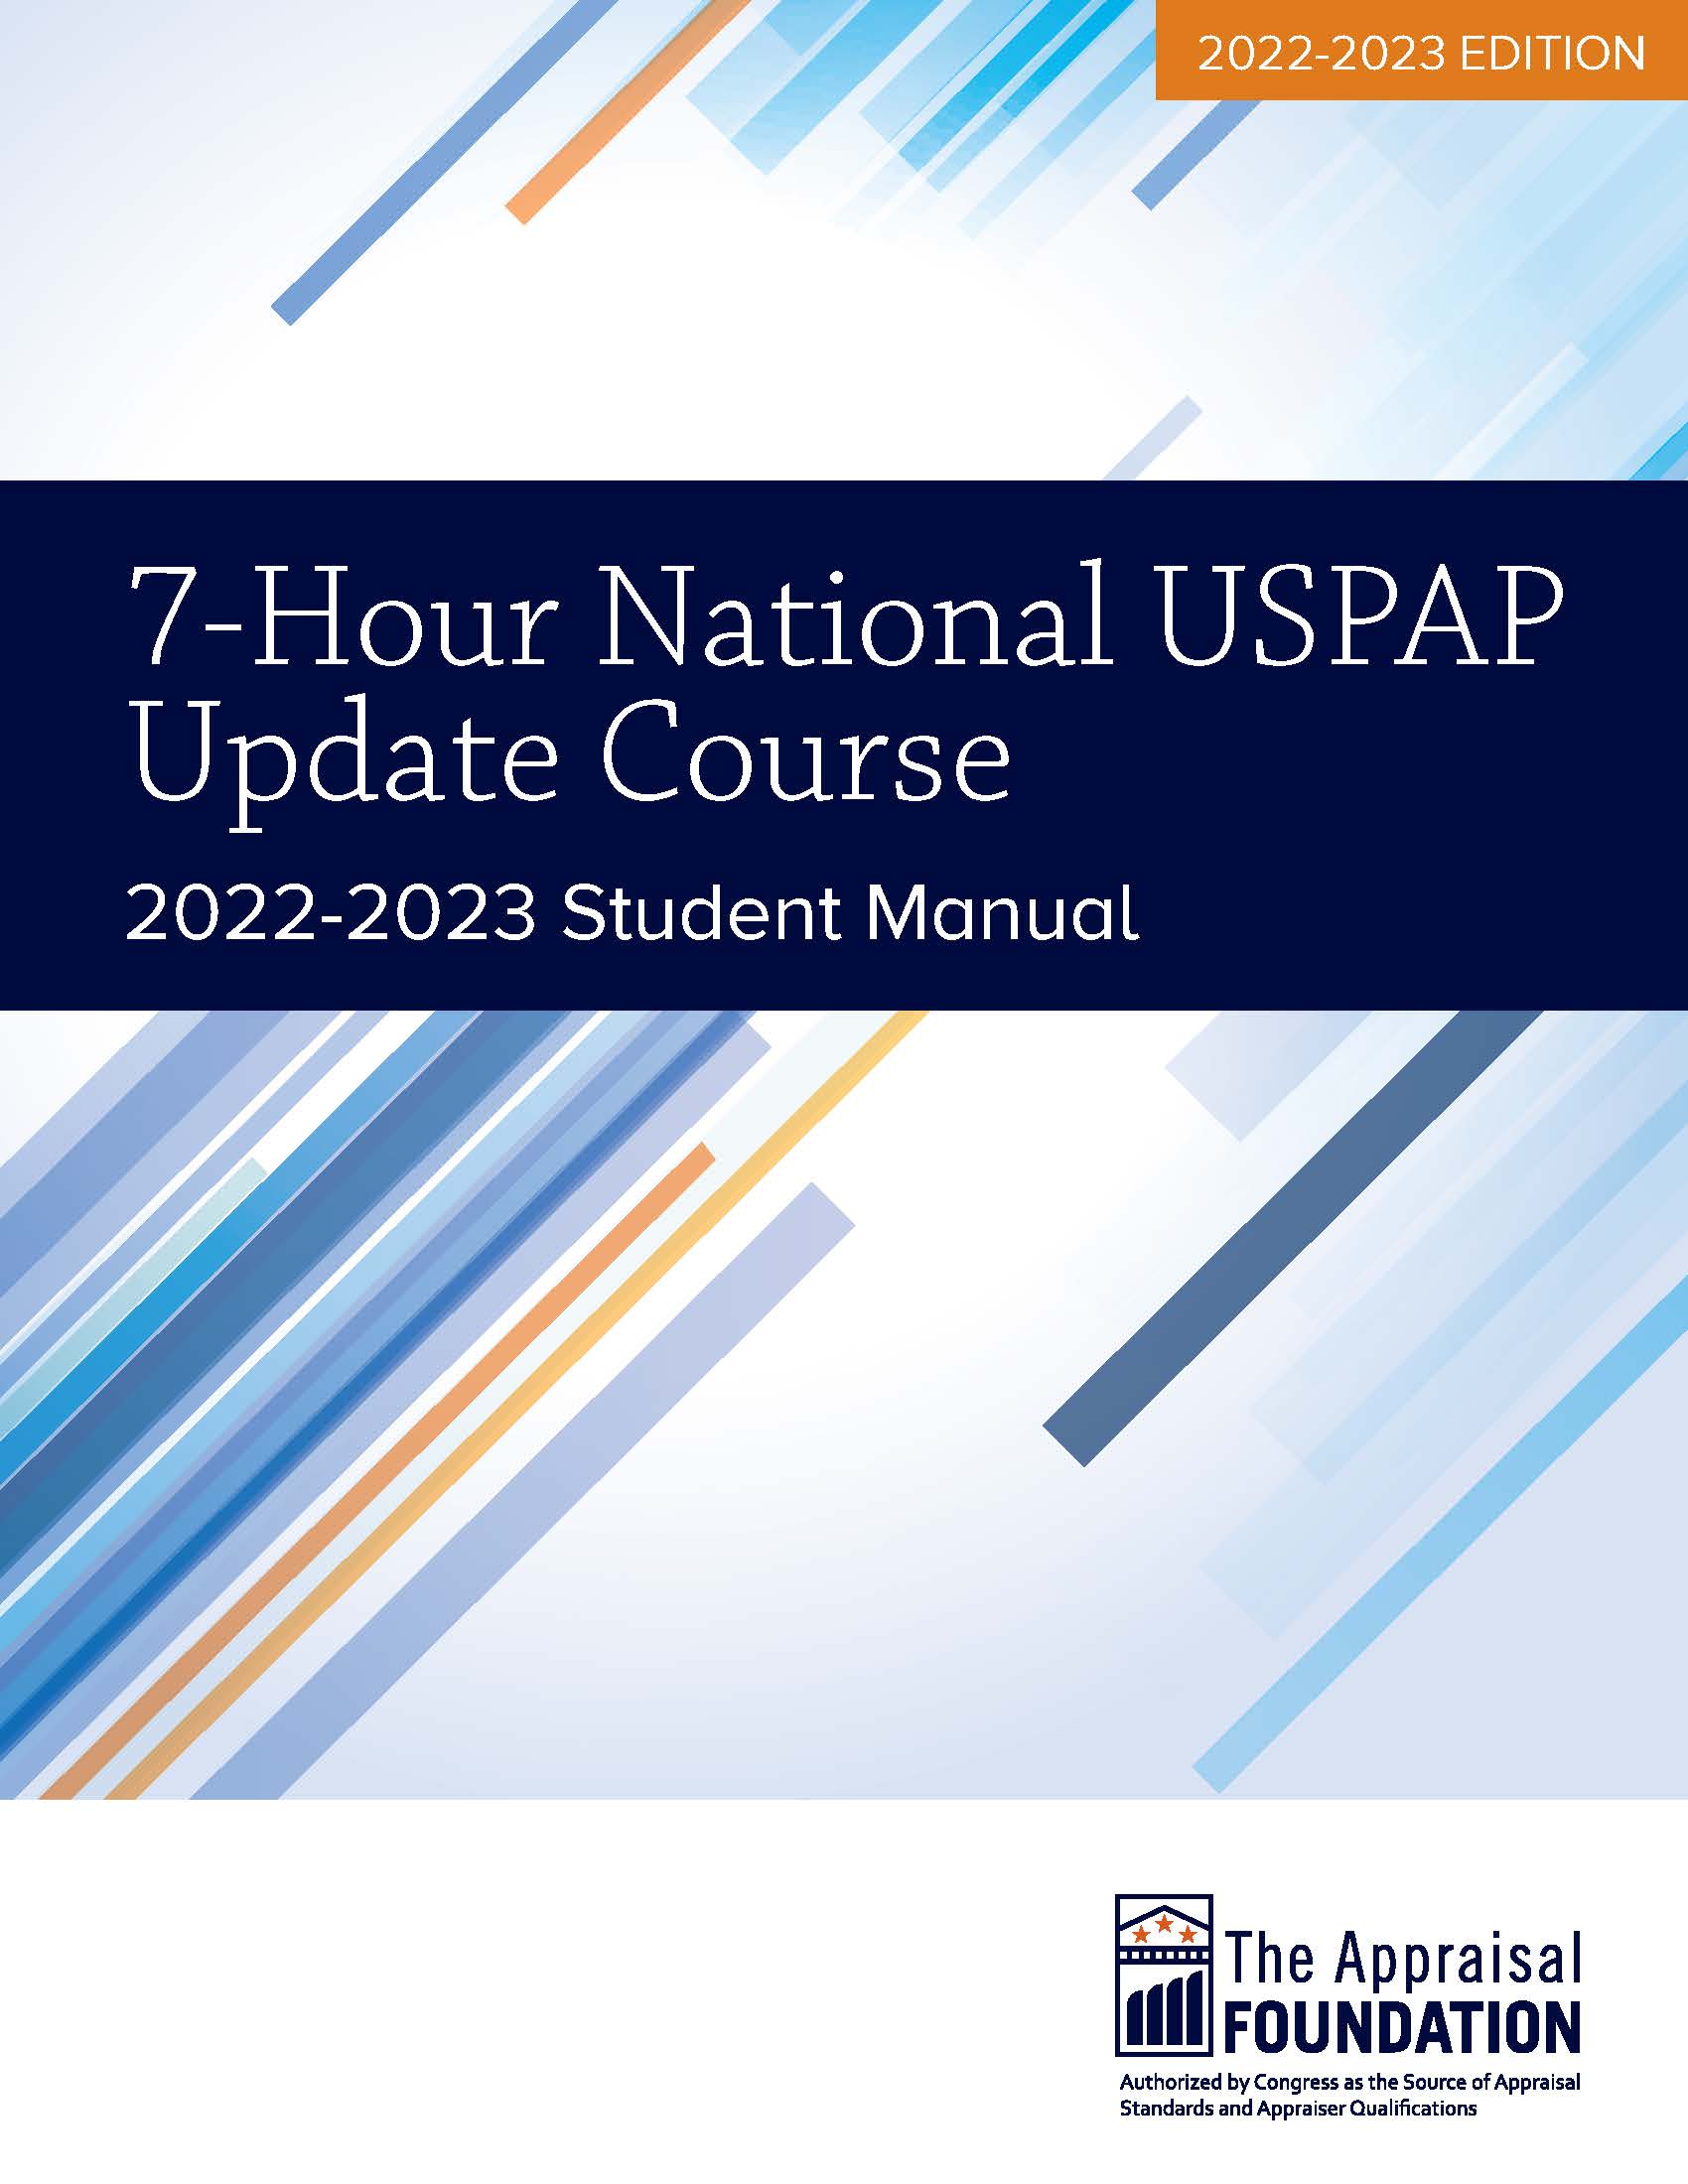 NEW 2022-23 7-Hour National USPAP Update Student Manual